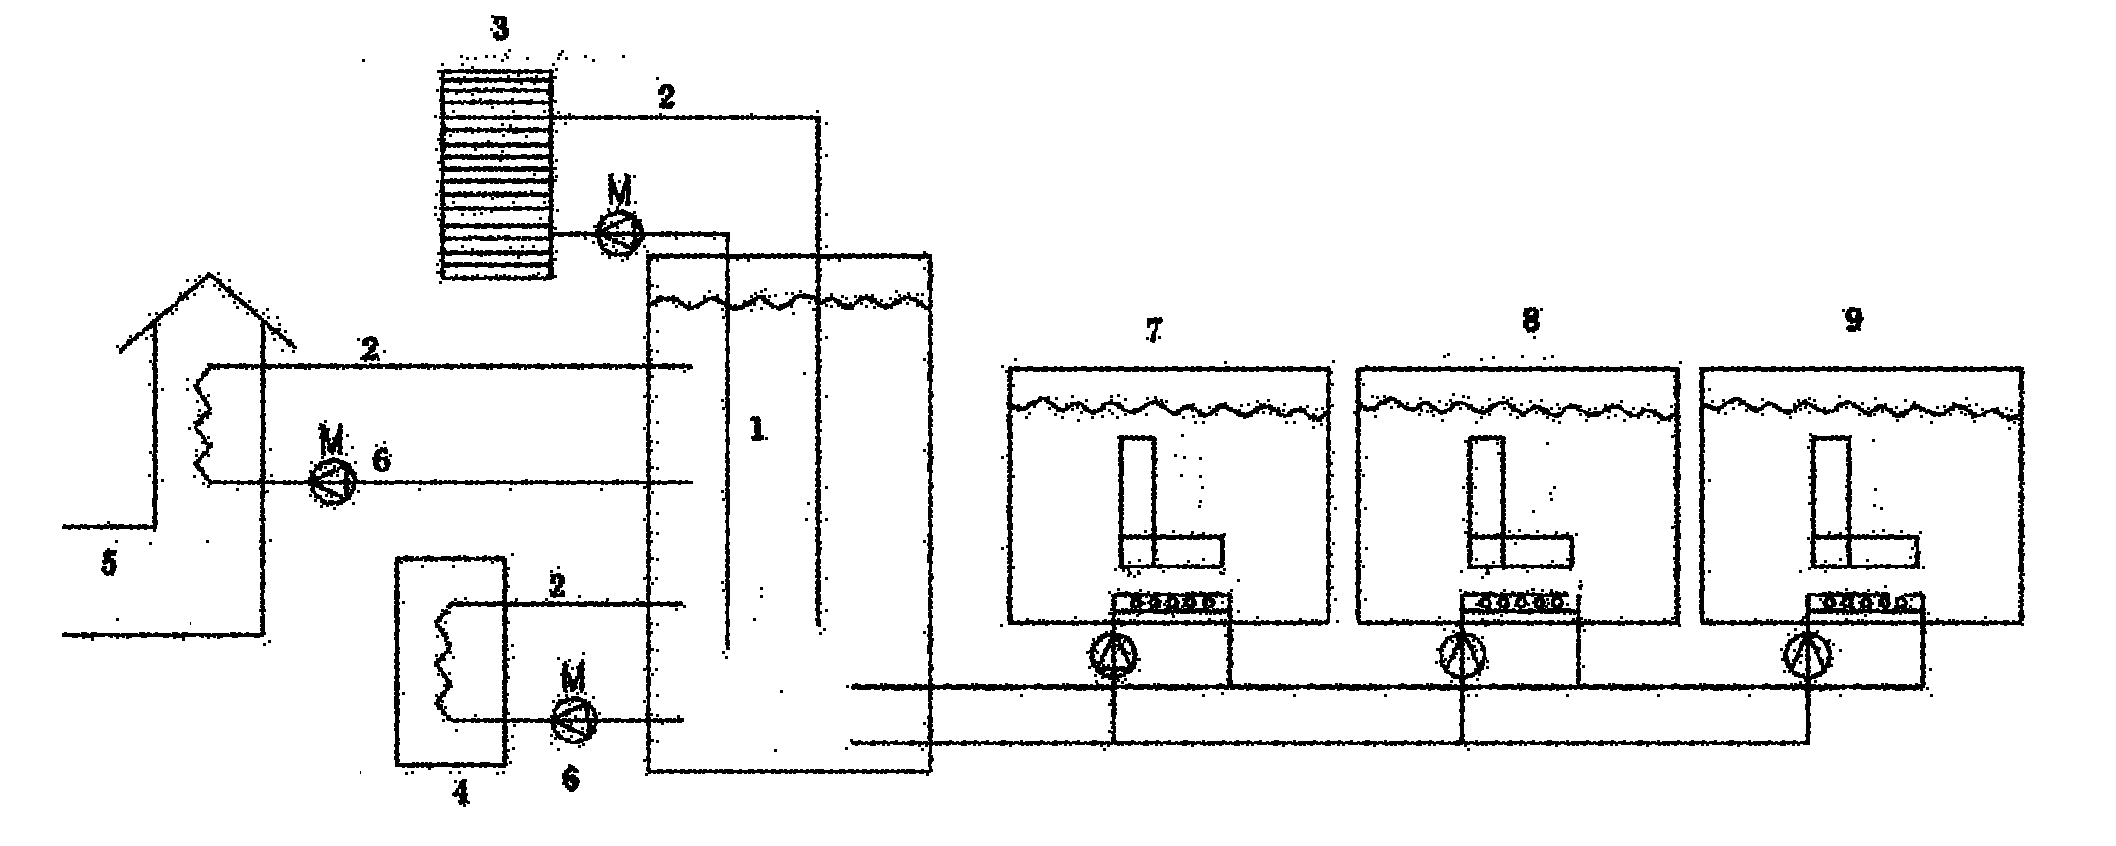 Thermal storage water heating system and heating mode